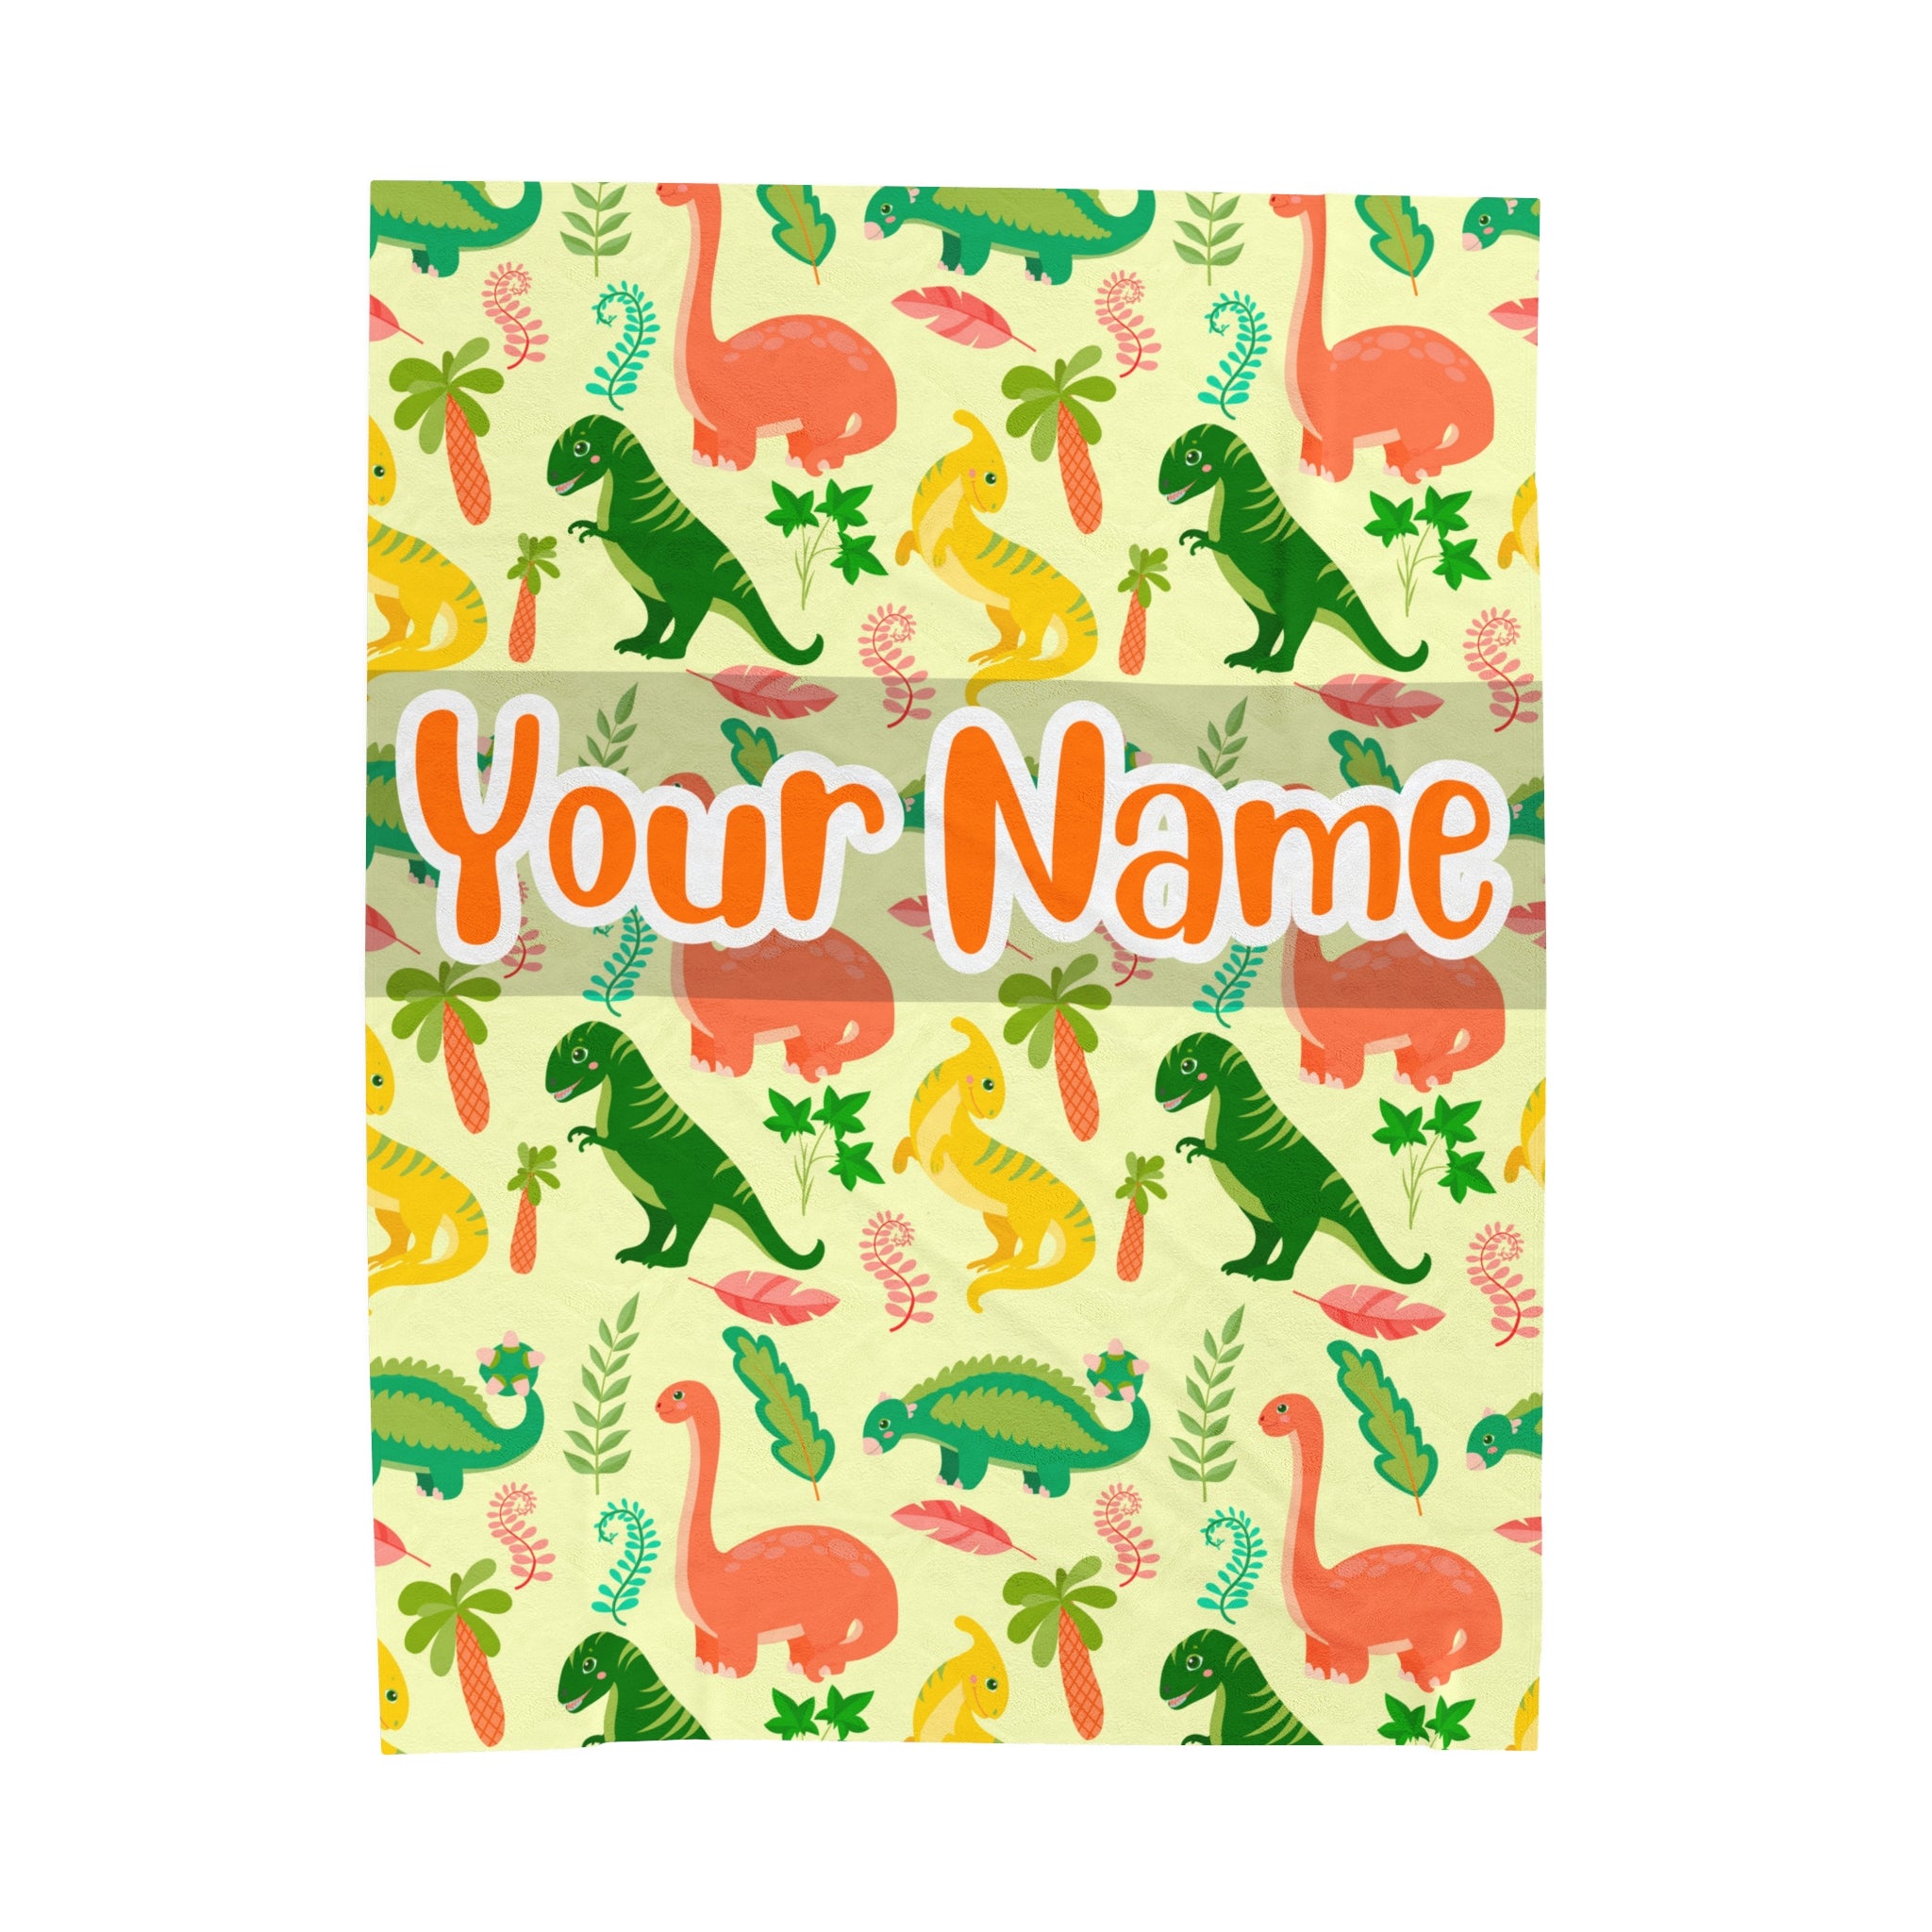 Cute Dinosaur Collections Blanket #4 Custom Blanket with Name - Personalized Blanket